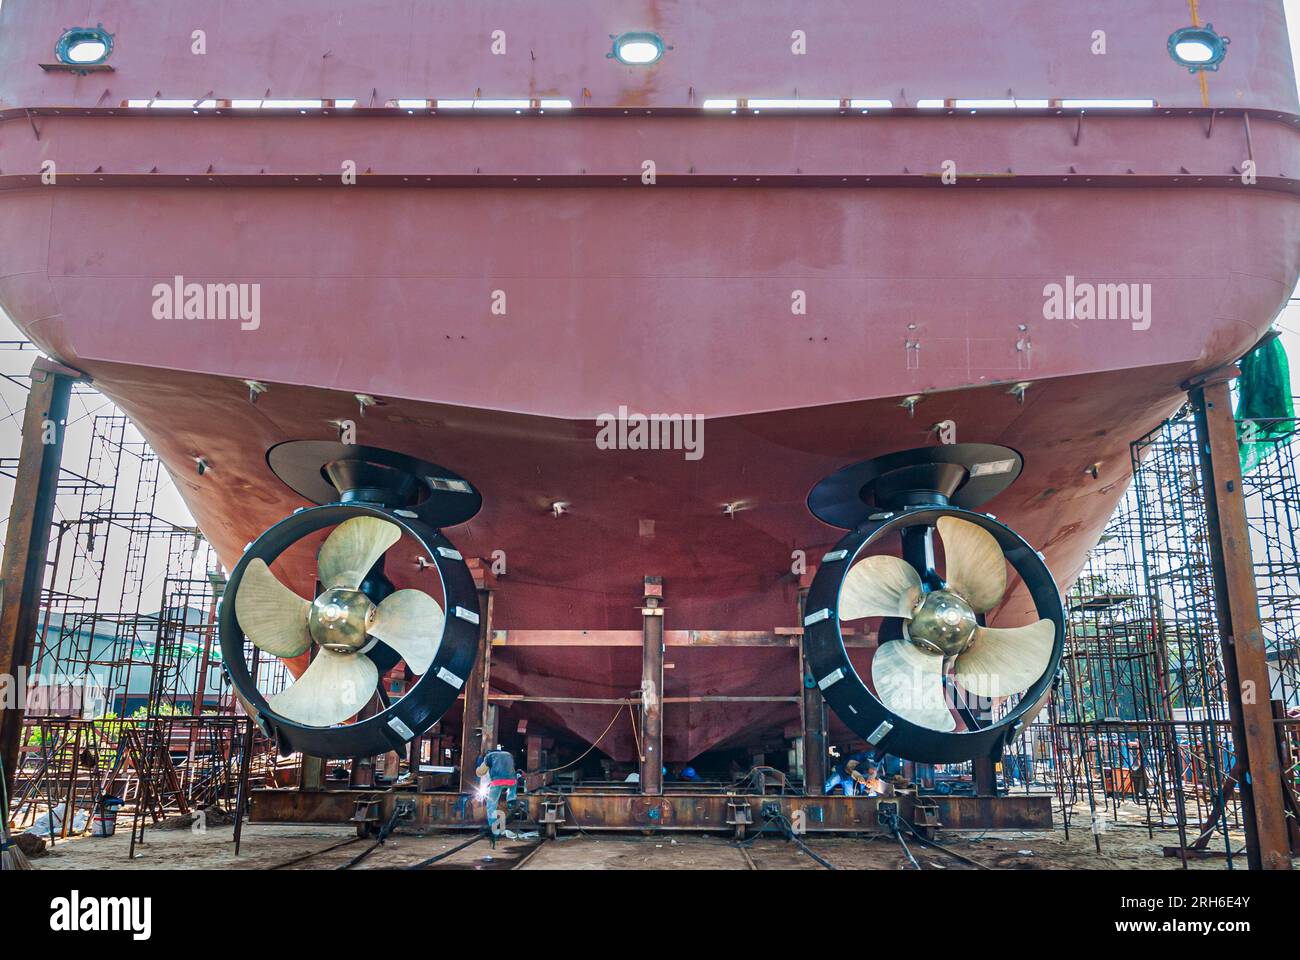 The Azimuth Schottel Stern thrusters on a Diving Support Ship during building at Italthai marine yard in Bangkok, Thailand Stock Photo